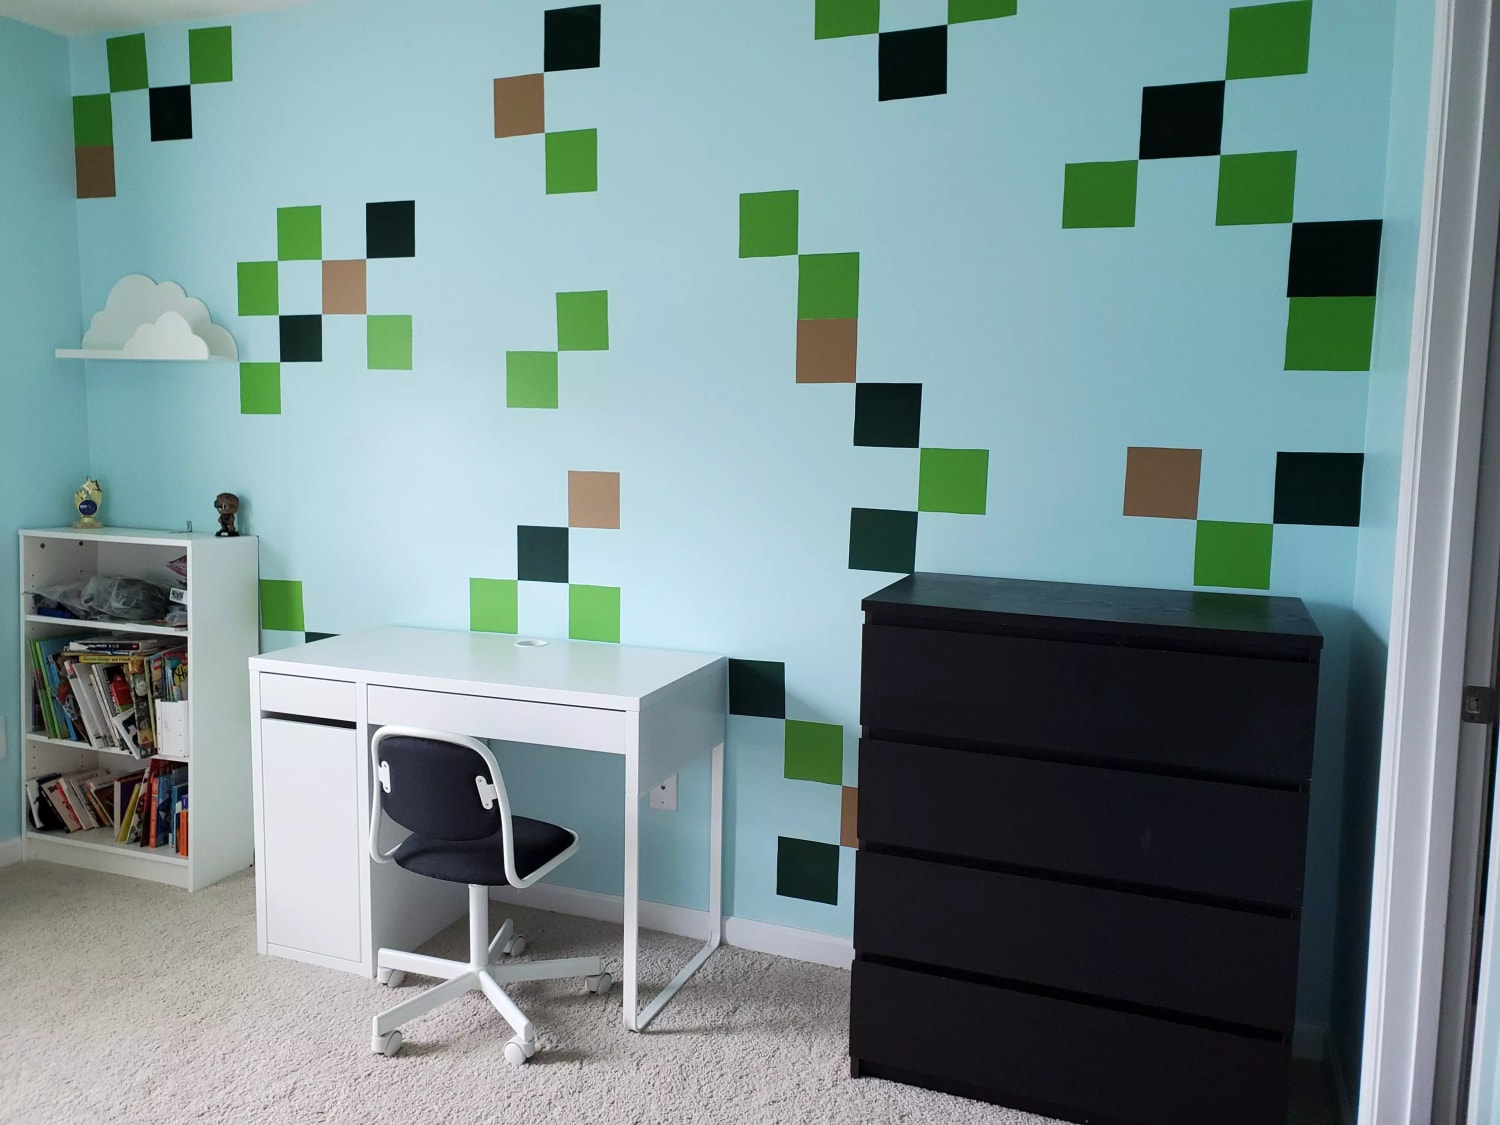 I made a Minecraft wall in my son's bedroom with wall-safe adhesive vinyl squares!